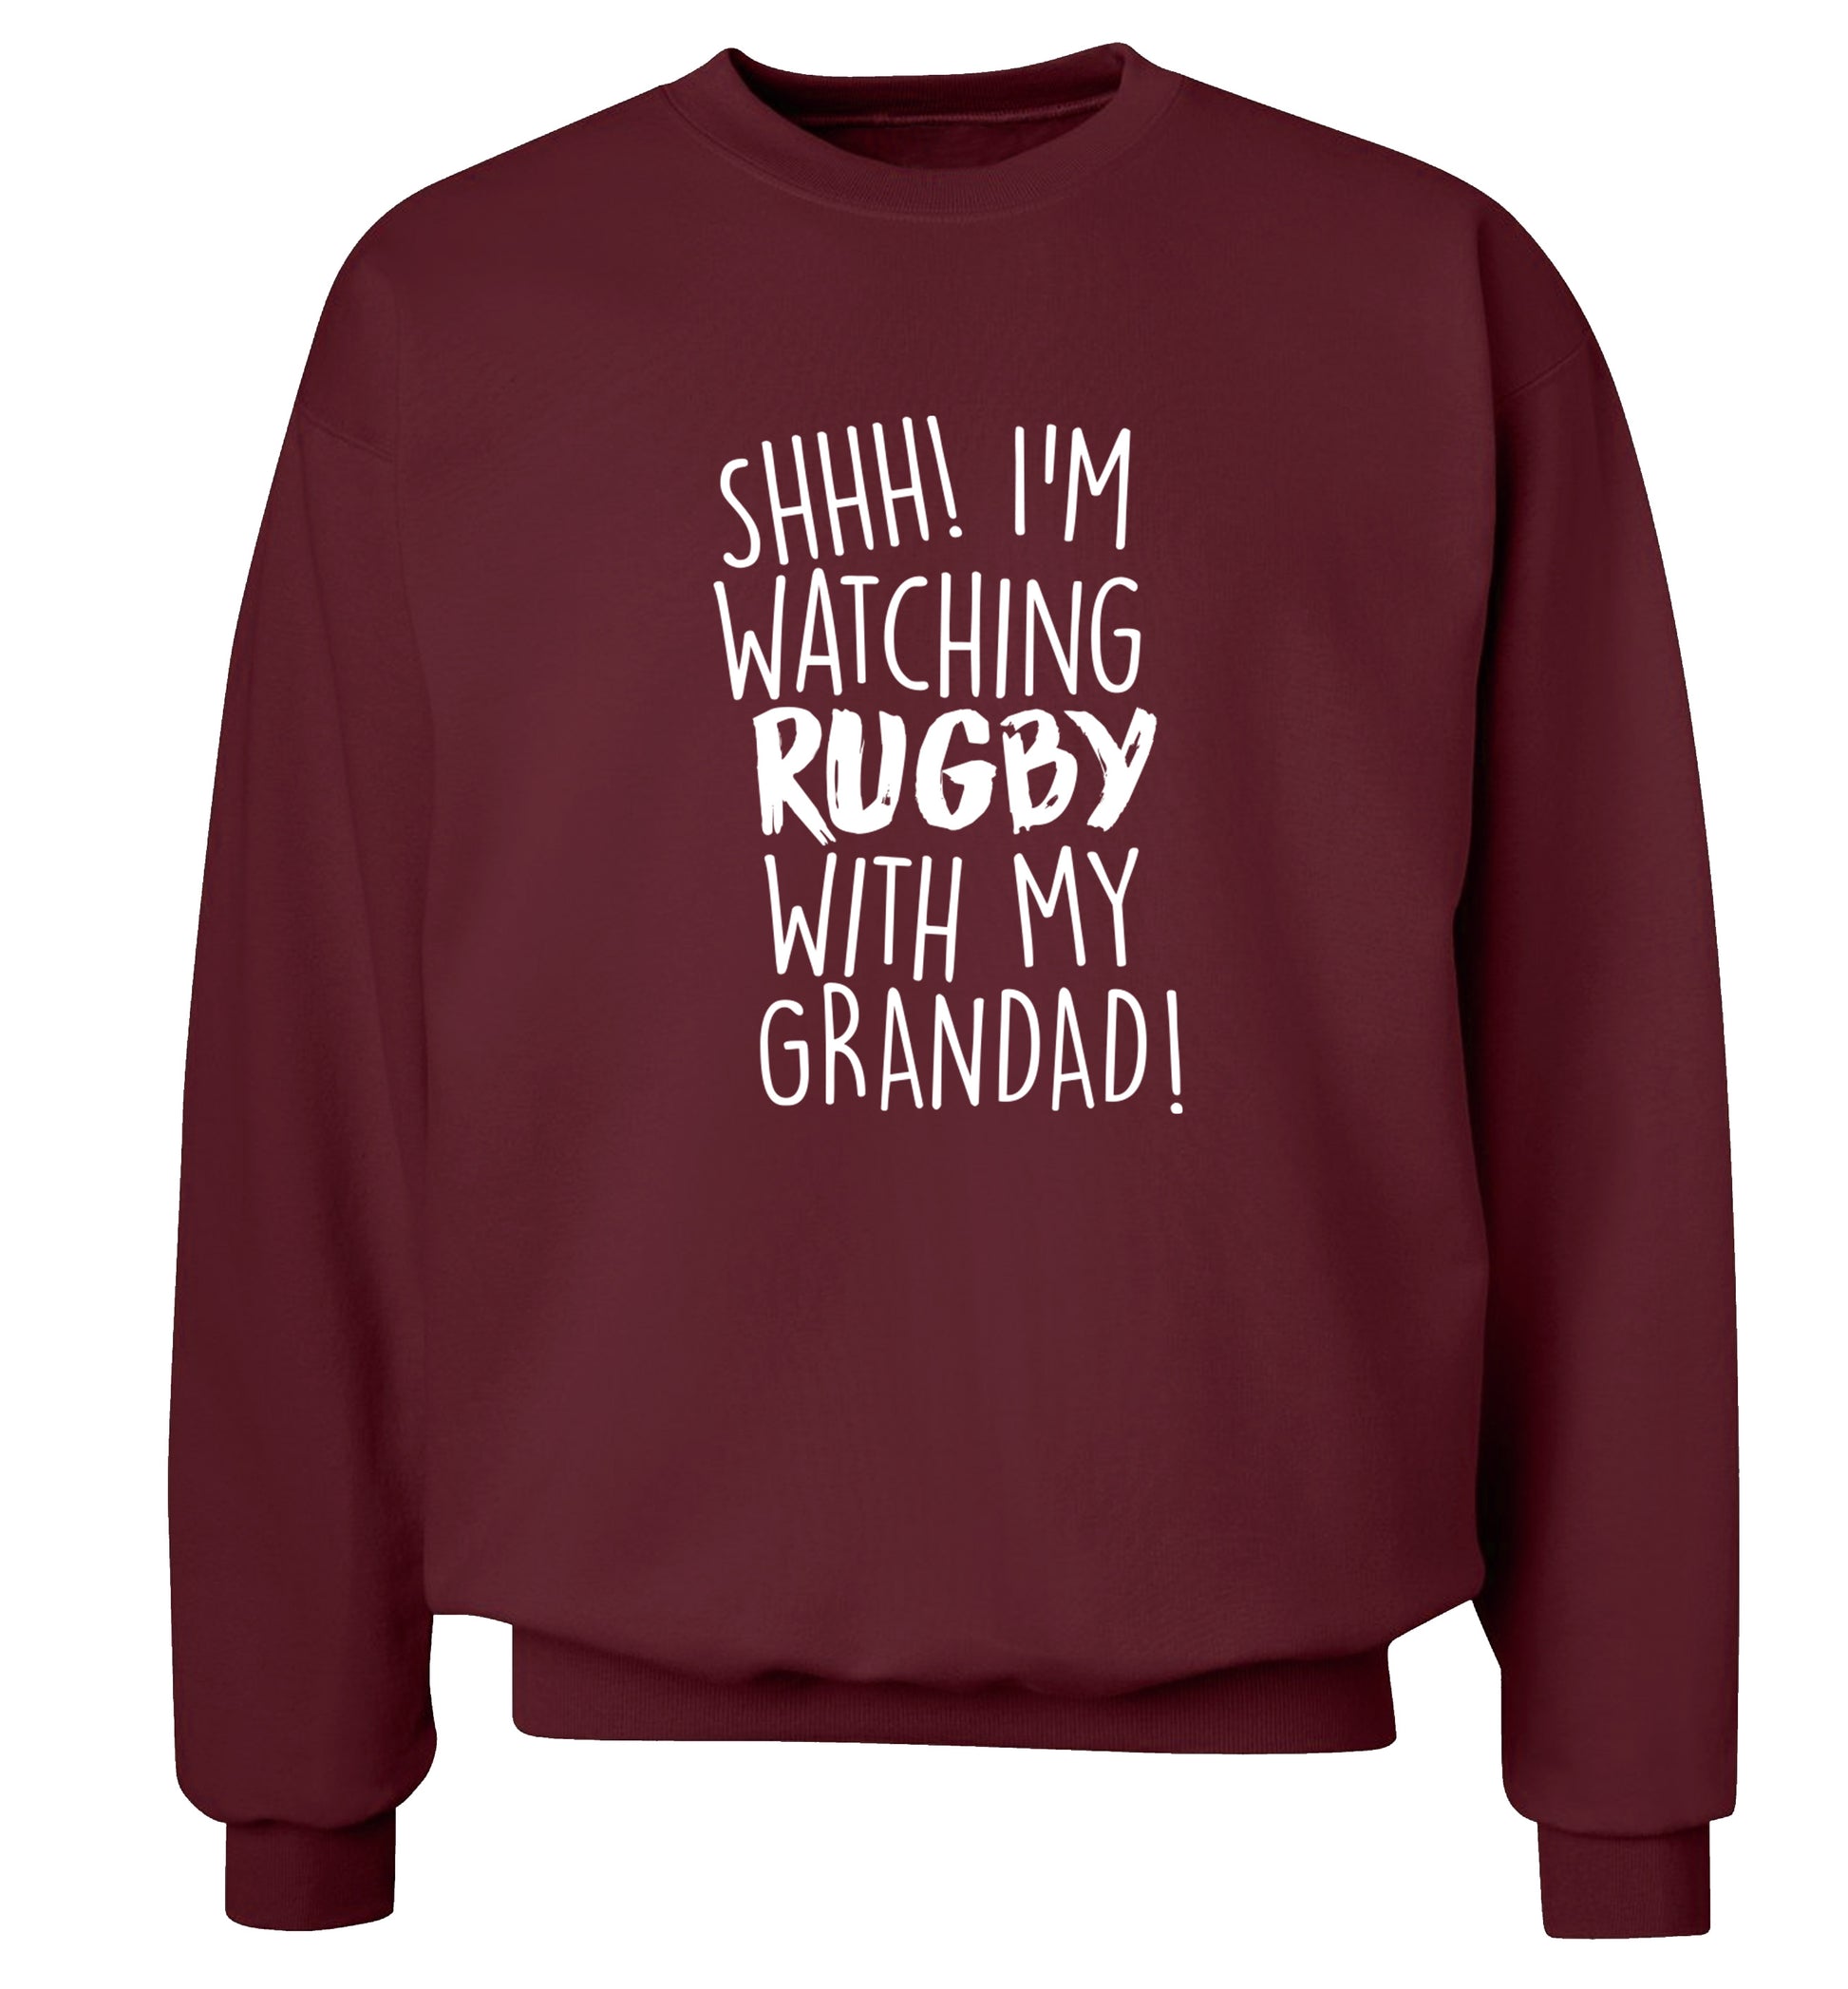 Shh I'm watching rugby with my grandad Adult's unisex maroon Sweater 2XL